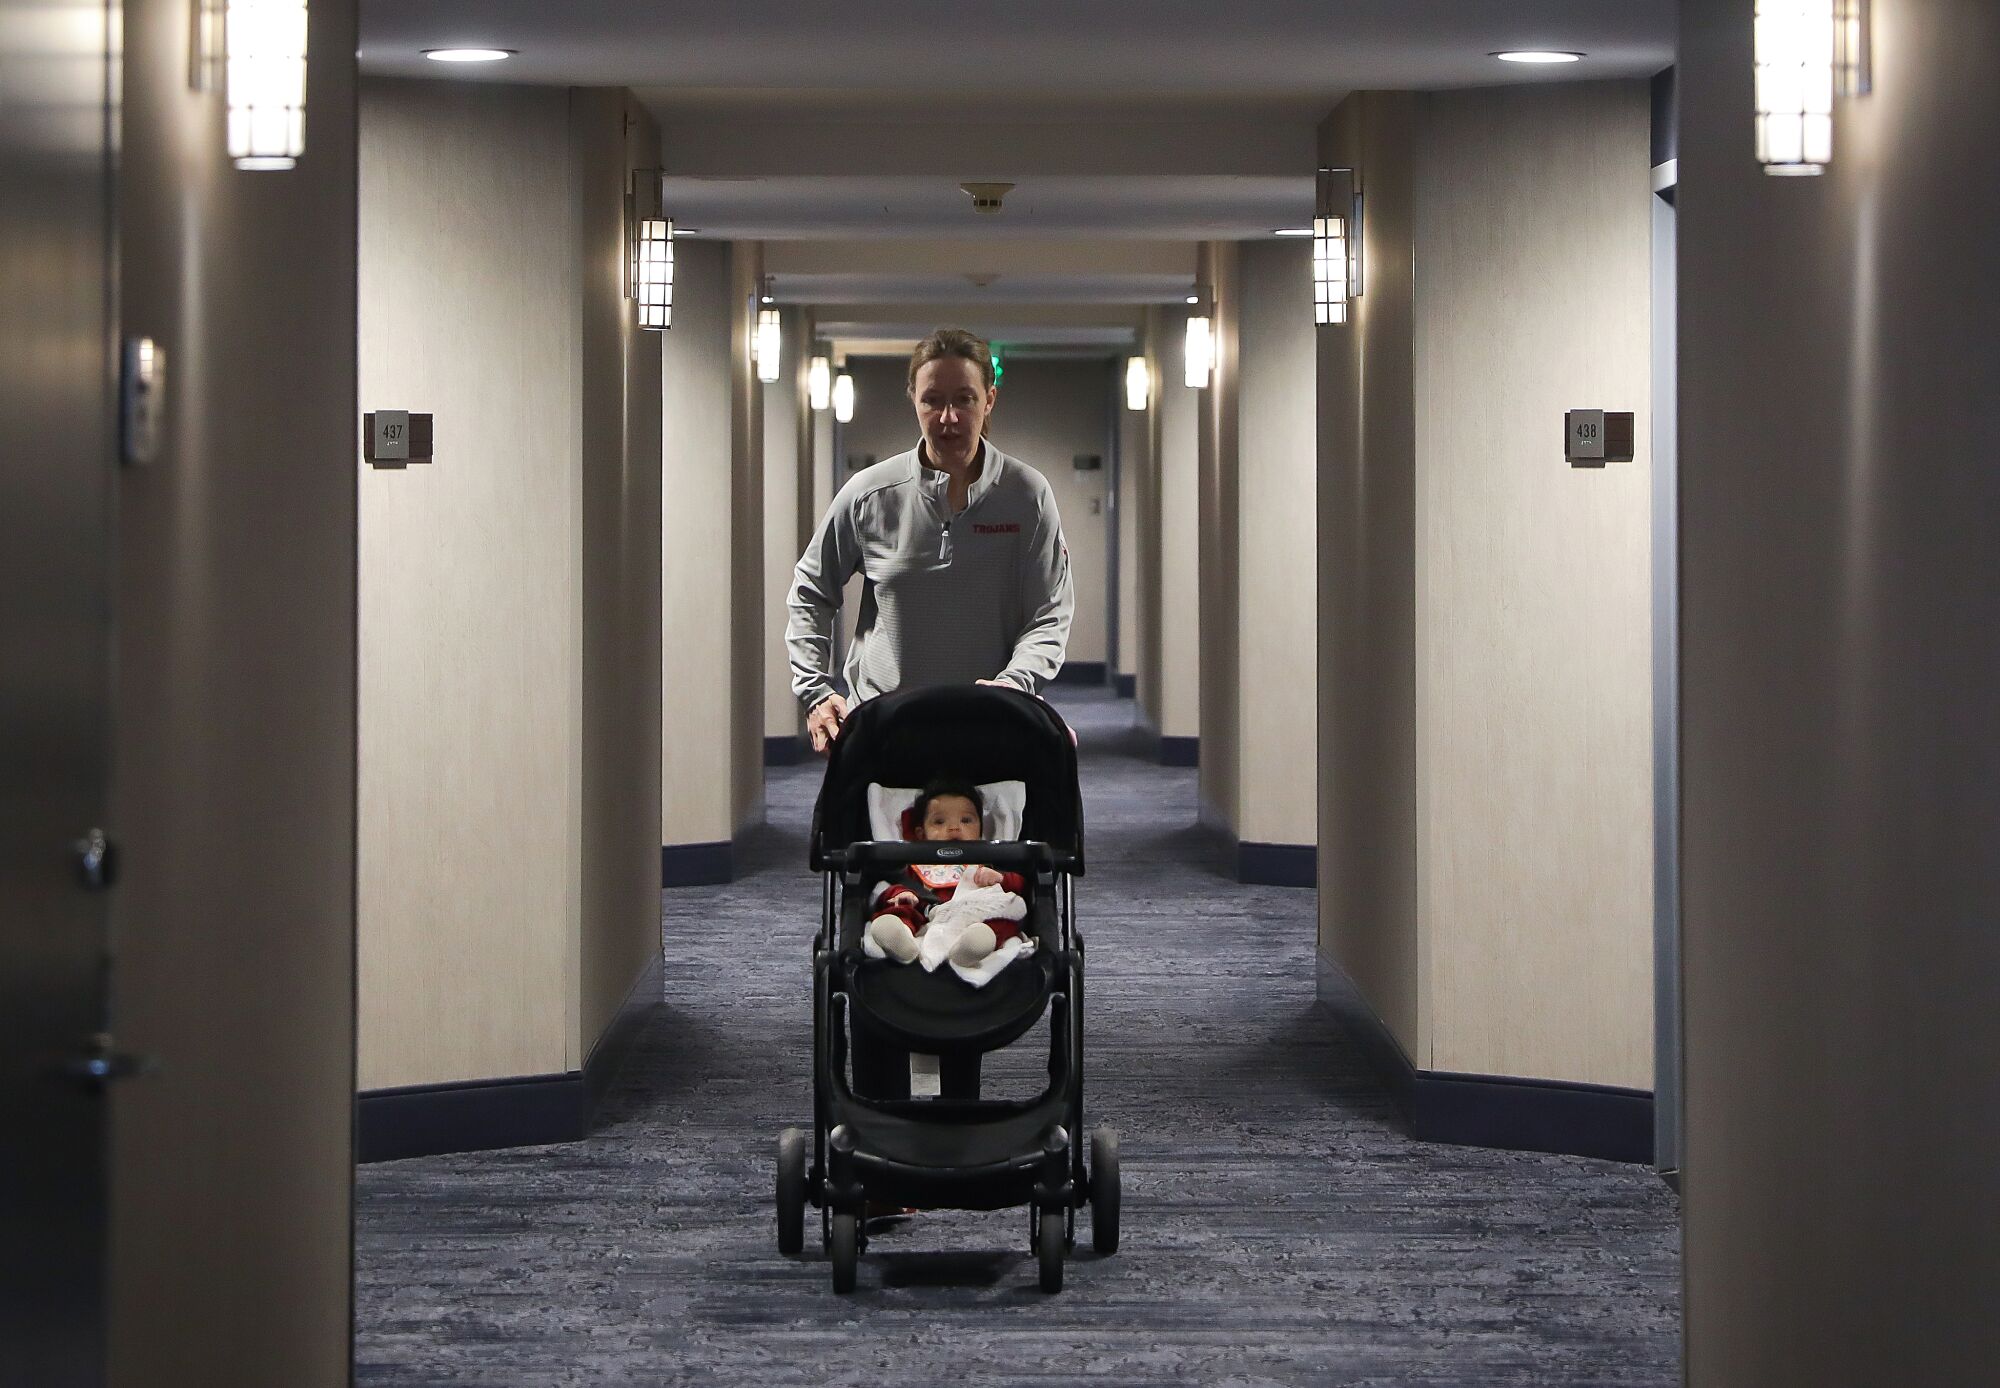 Lindsay Gottlieb pushes her daughter down the hallway at their hotel.